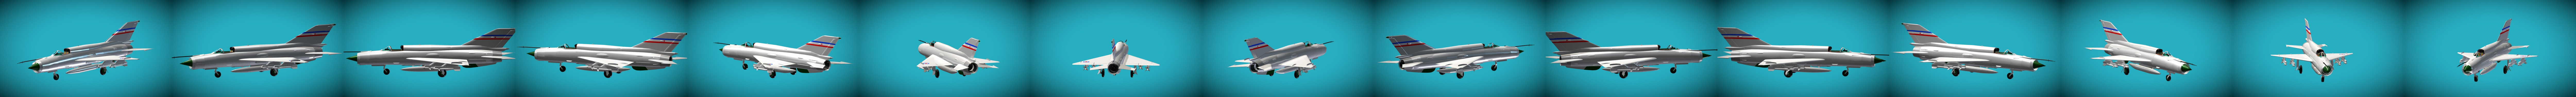 WIP] Mig-21 PFM (Fishbed-F) - ARMA 3 - ADDONS & MODS: DISCUSSION - Bohemia  Interactive Forums